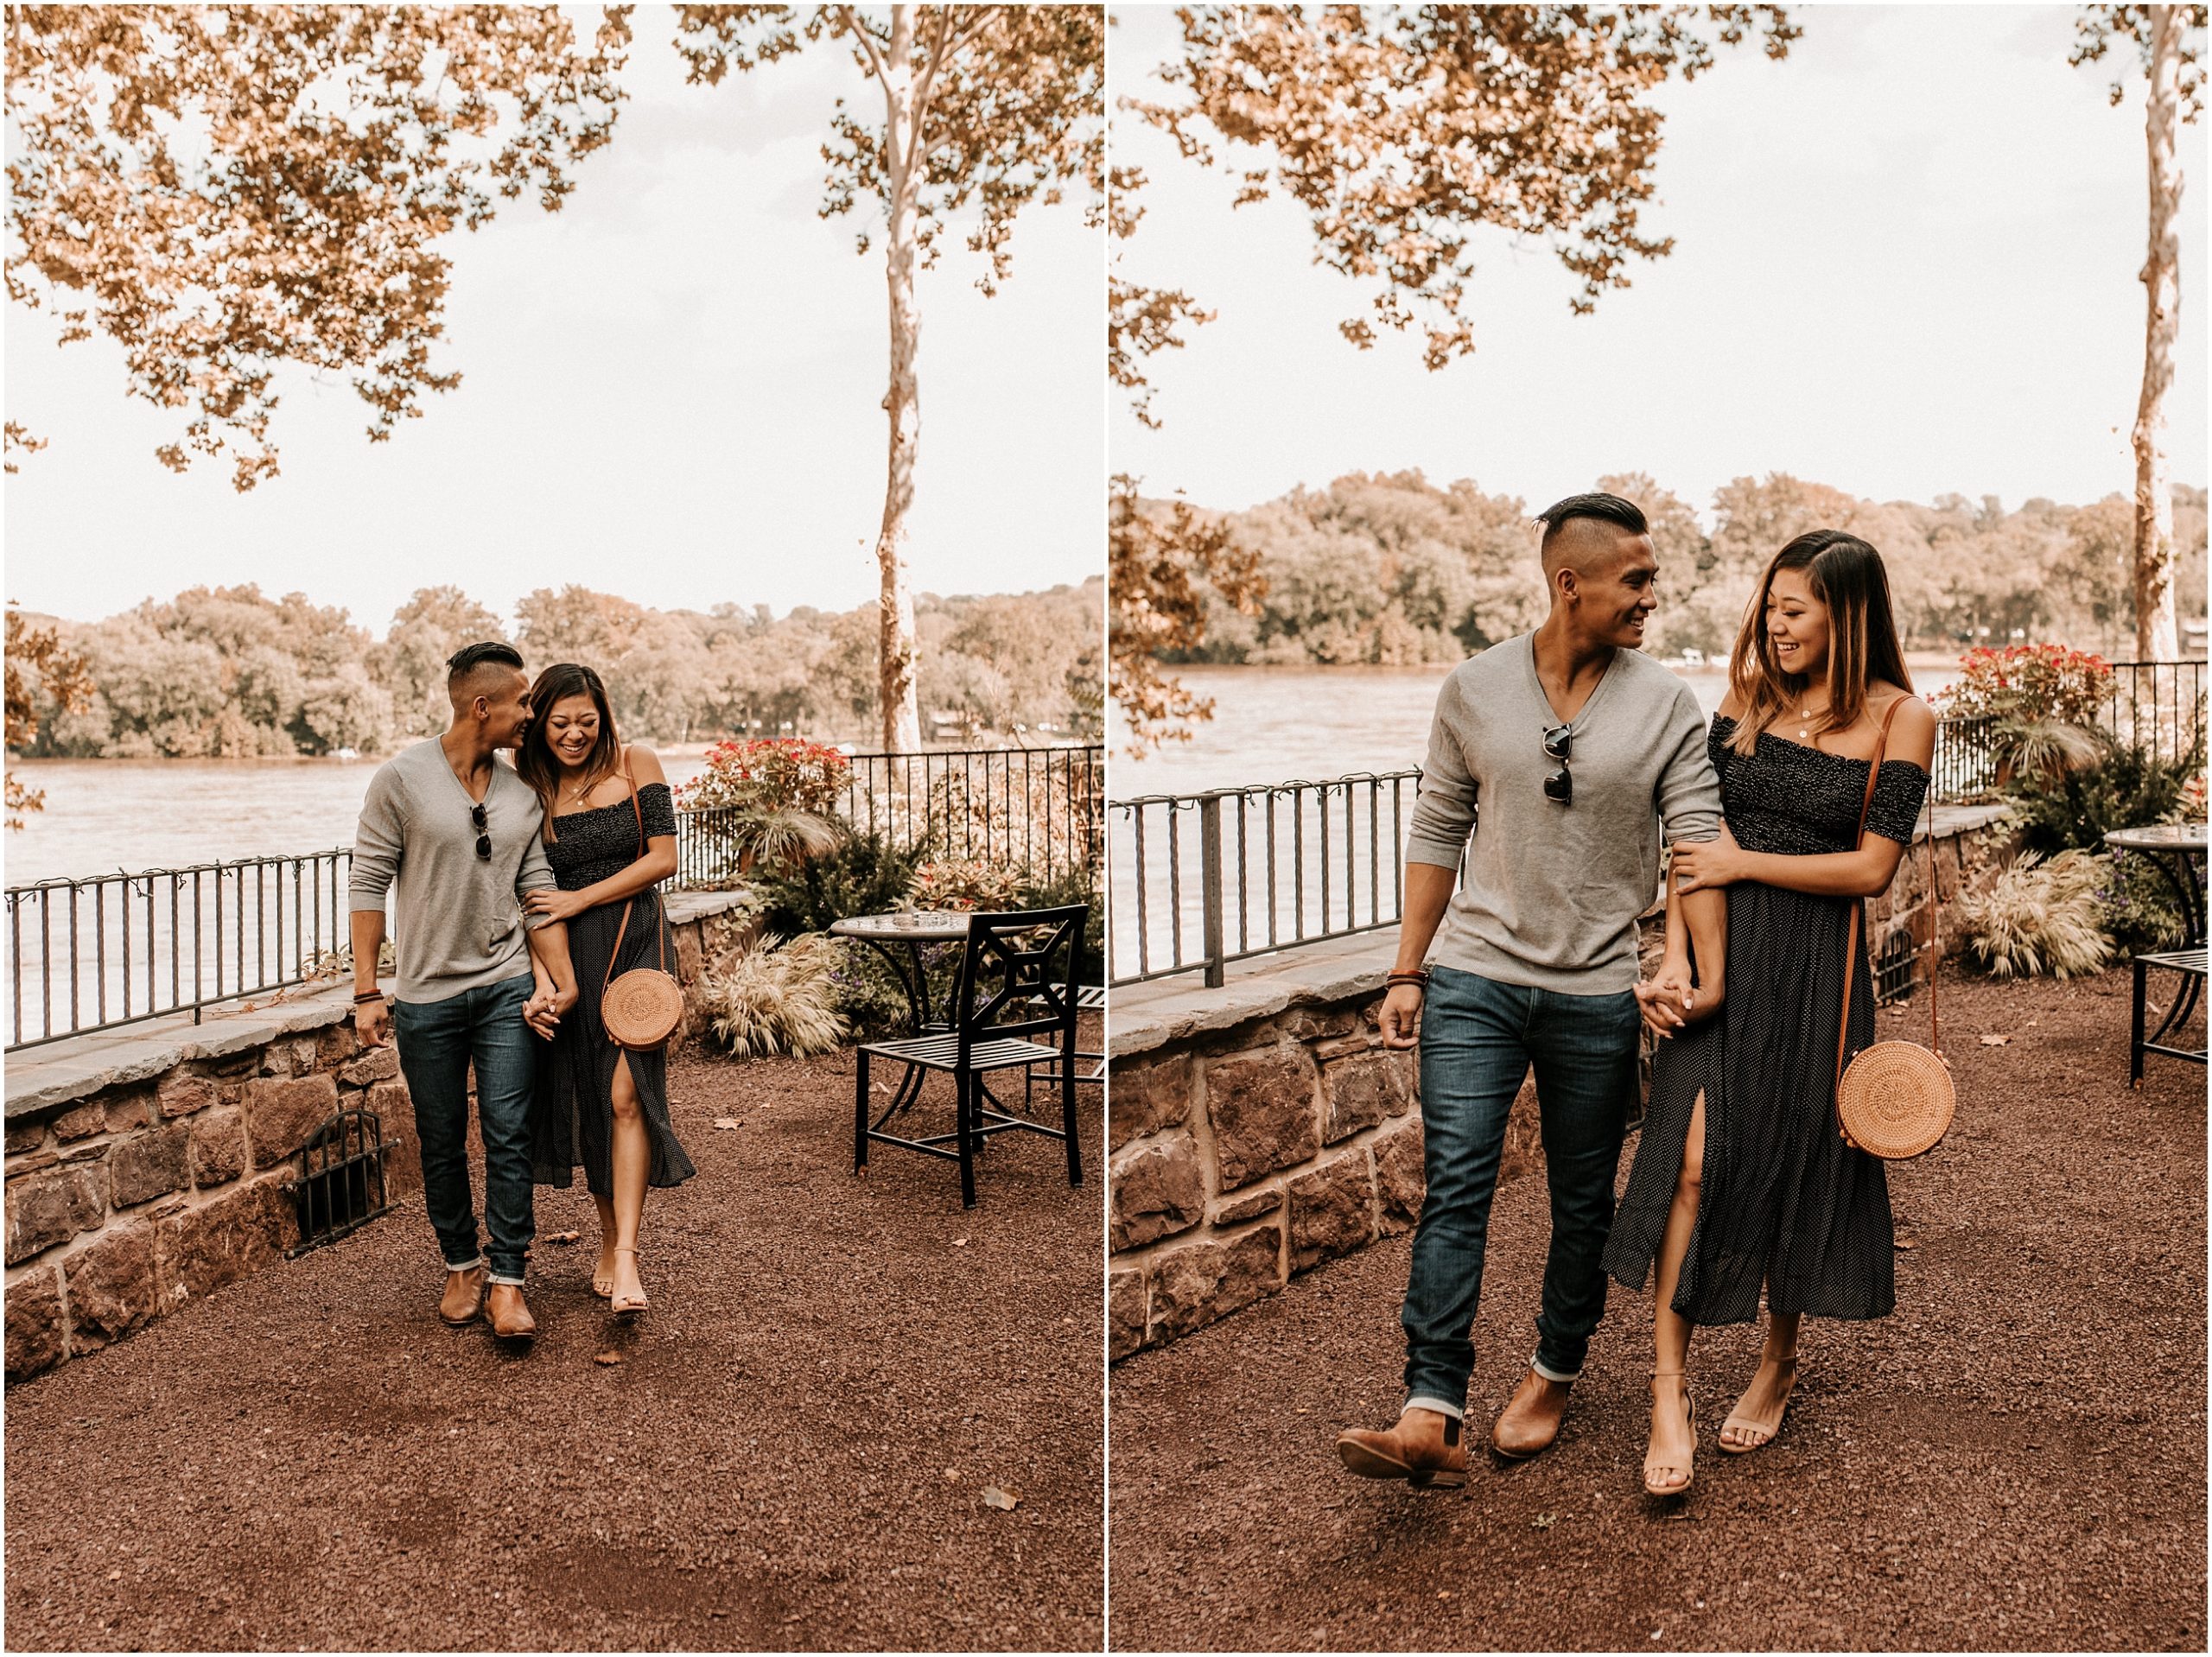 Fall Couples Session in New Hope, PA